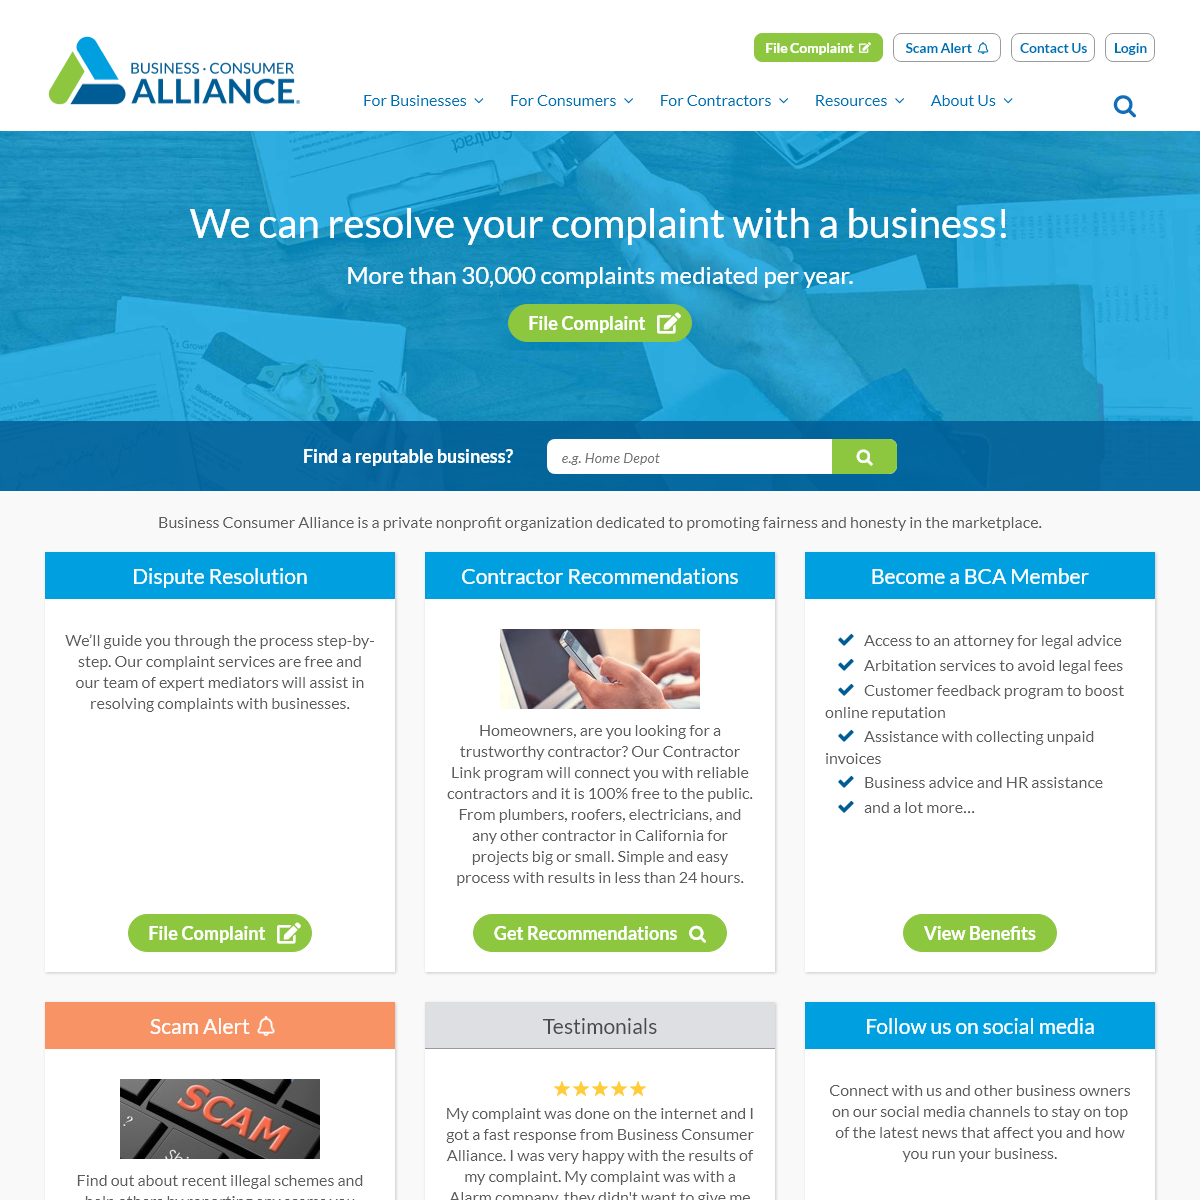 A complete backup of businessconsumeralliance.org